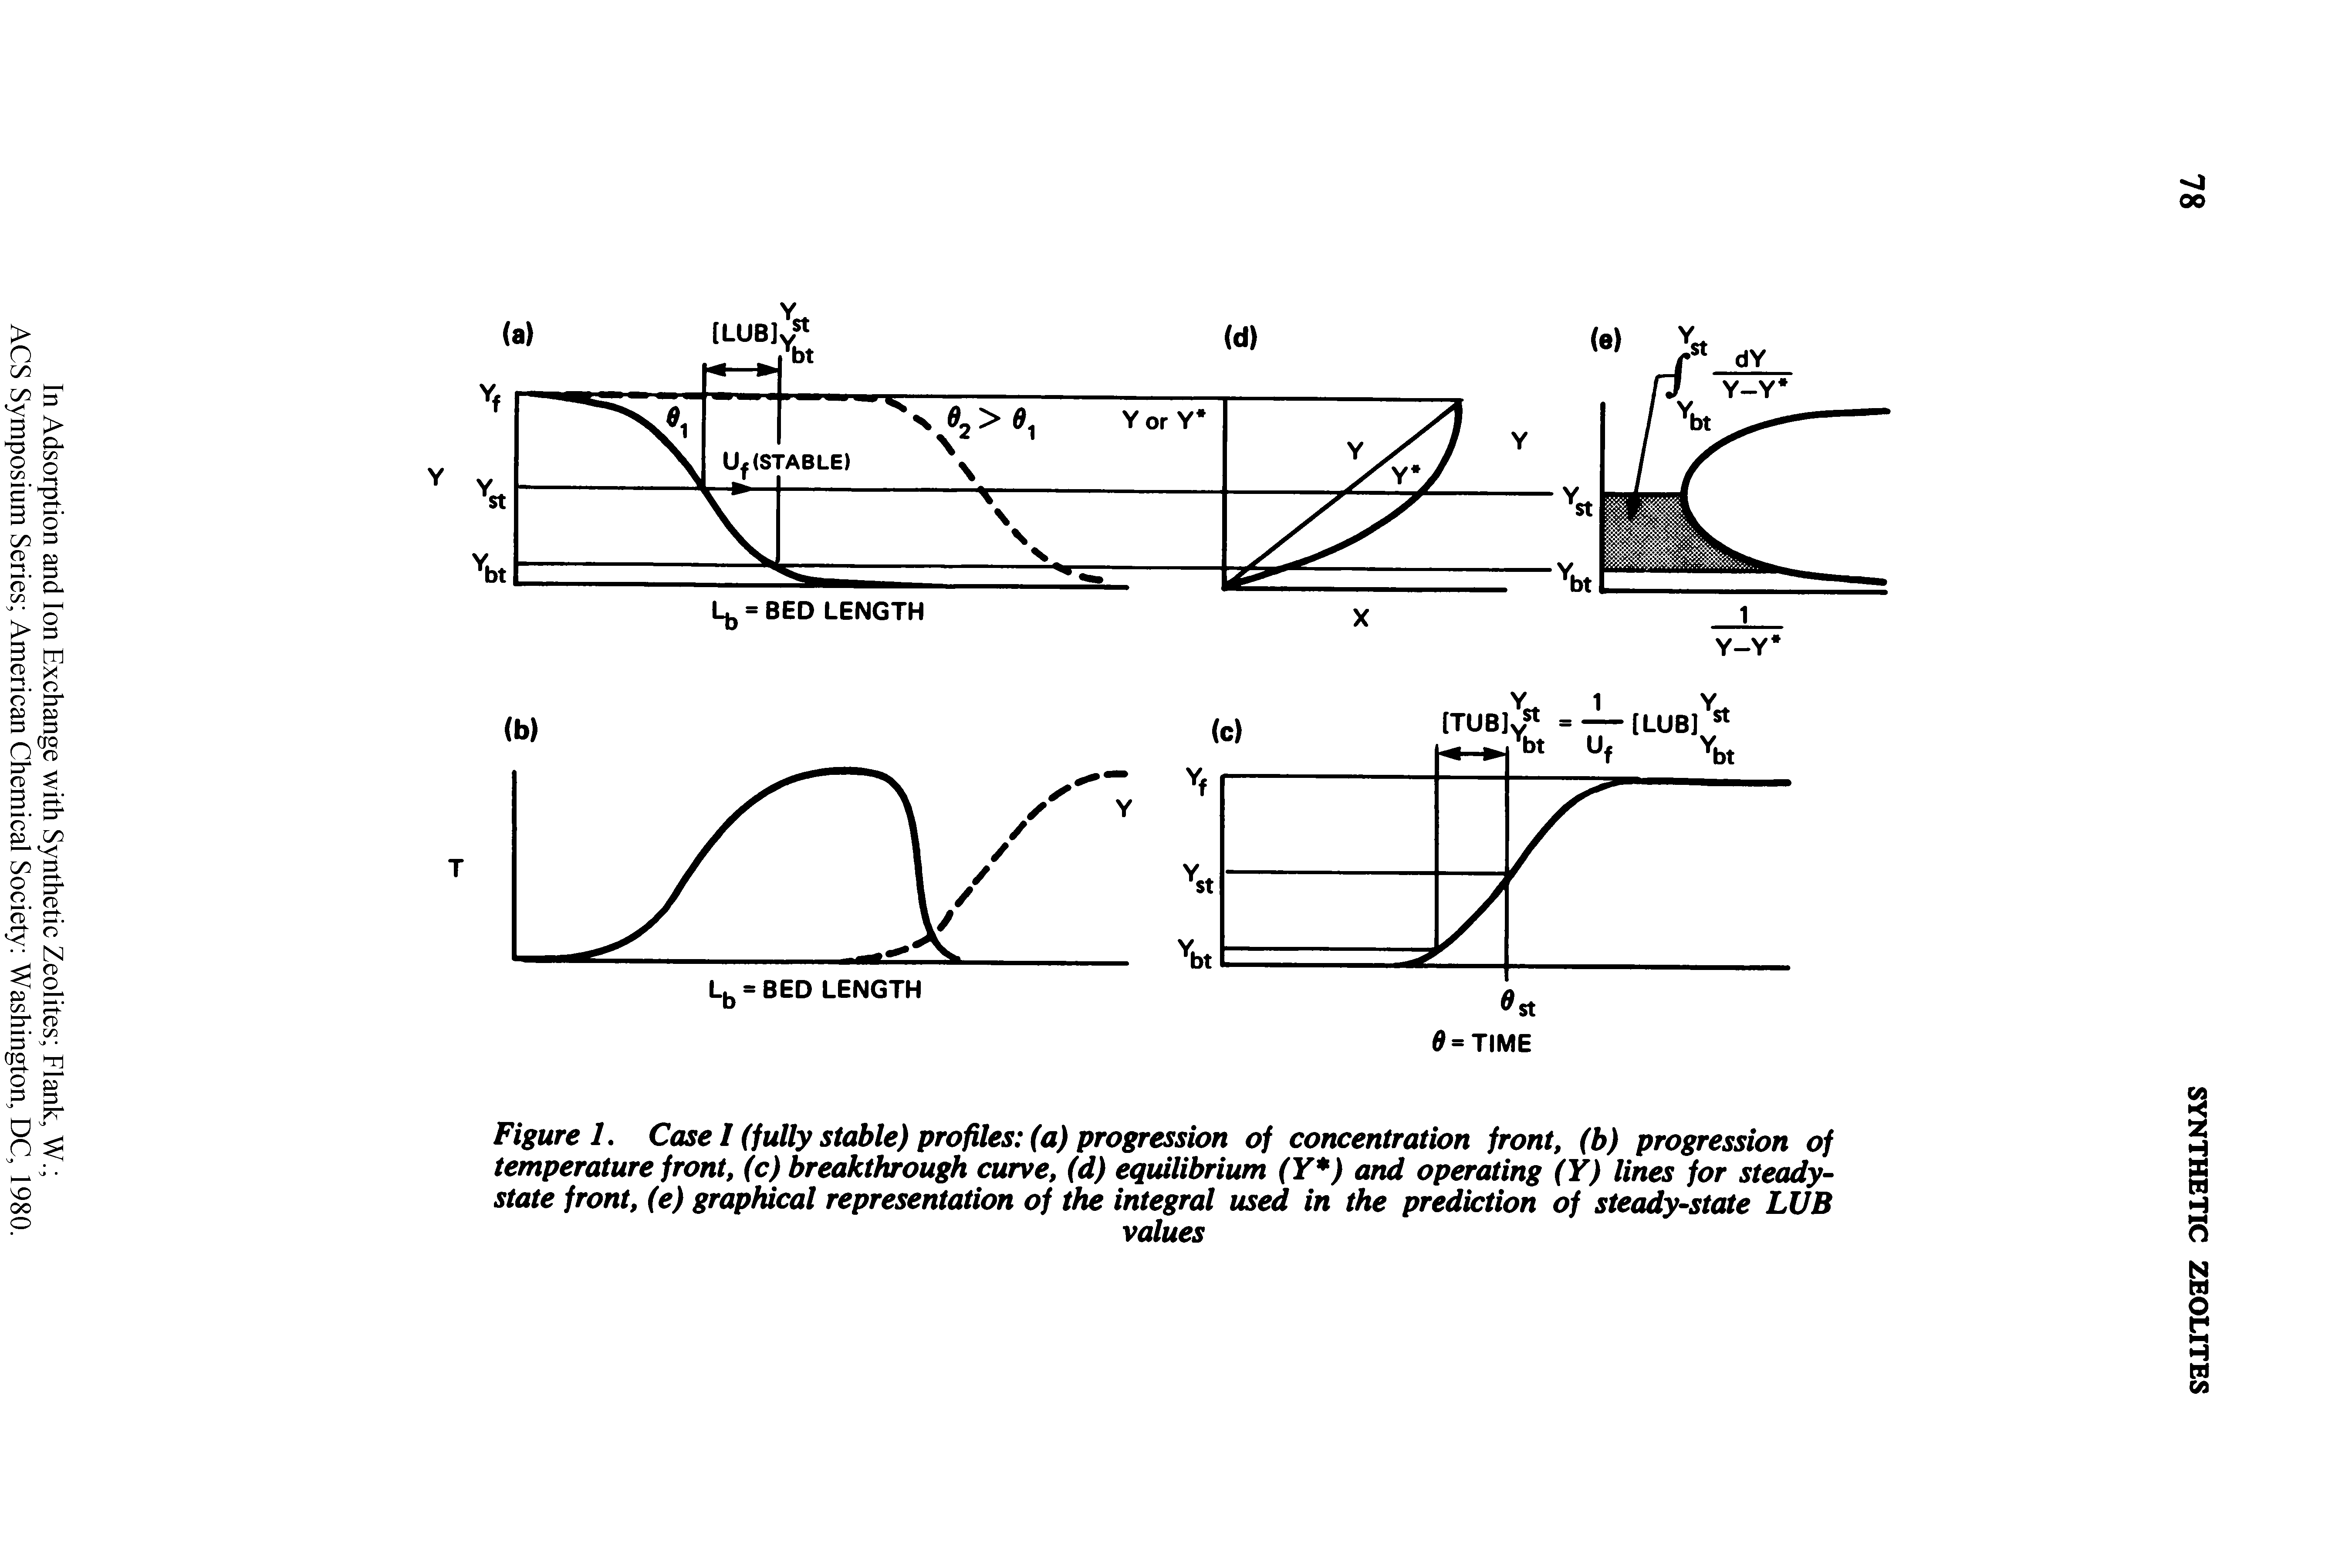 Figure 1. Case I (fully stable) profiles (a) progression of concentration front, (b) progression of temperature front, (c) breakthrough curve, (d) equilibrium (Y ) and operating (Y) lines for steady-state front, (e) graphical representation of the integral used in the prediction of steady-state LUB...